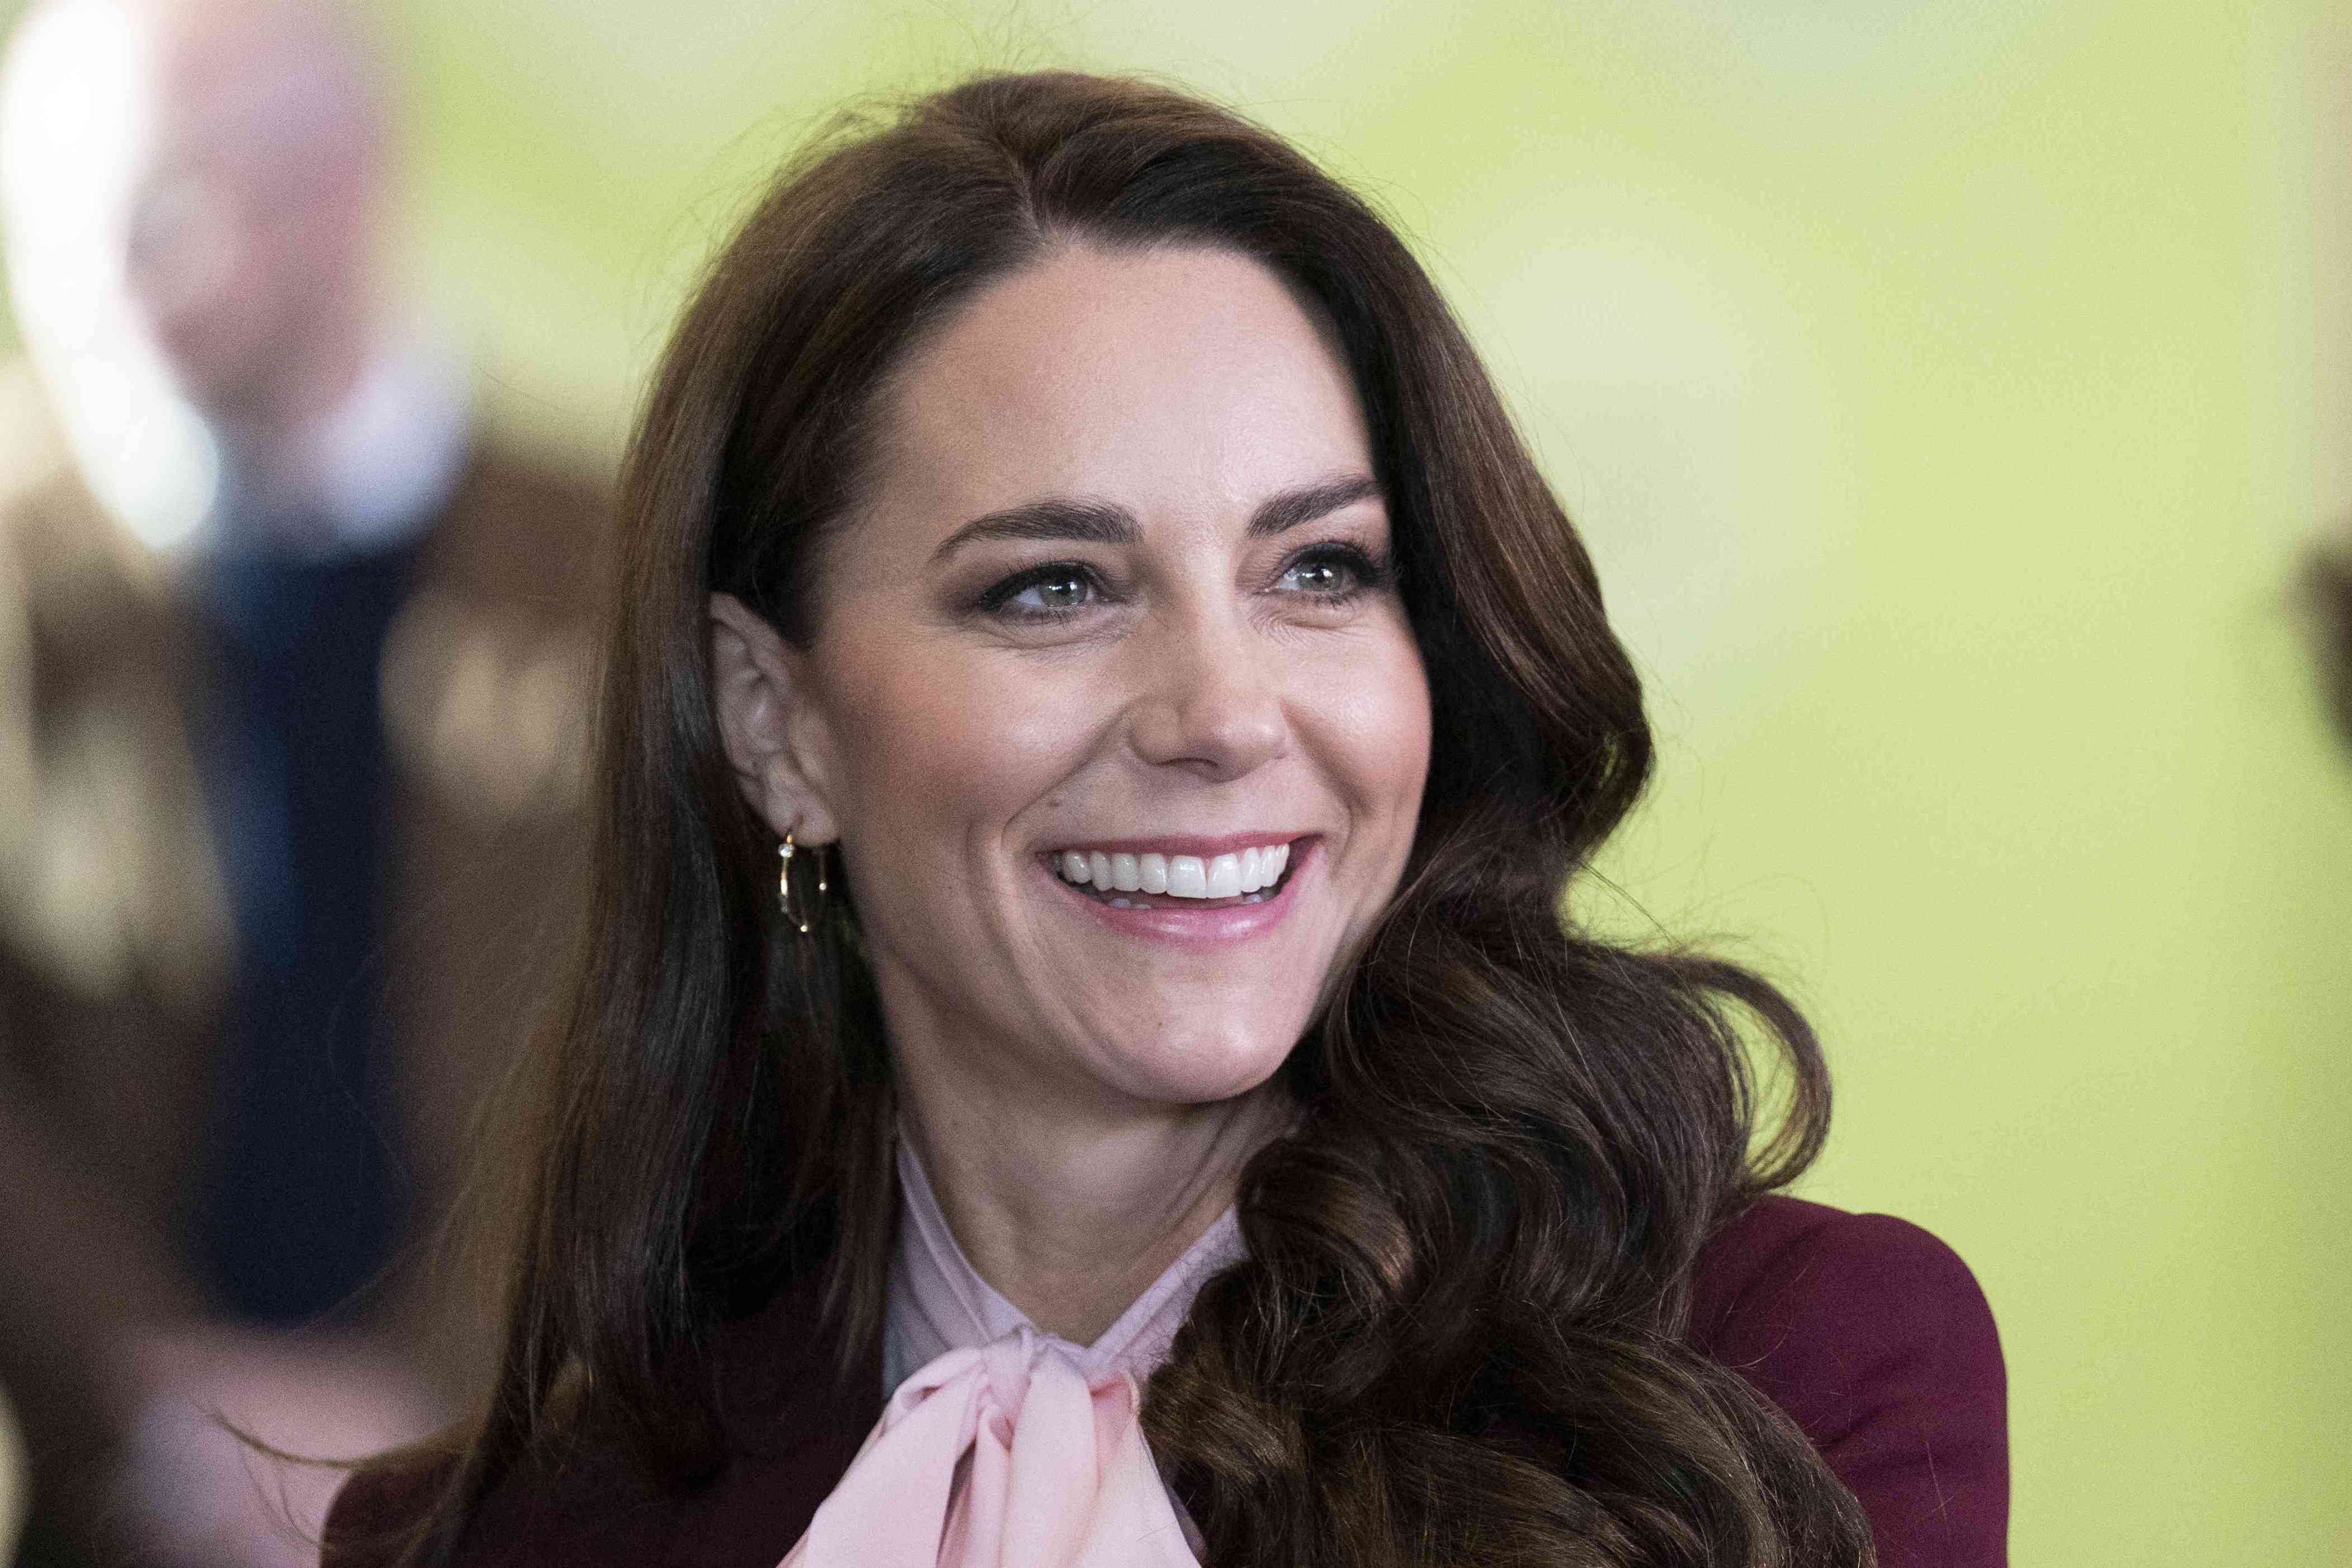 Kate Middleton Hard-Launched a New Hobby in a Full Beekeeper's Suit